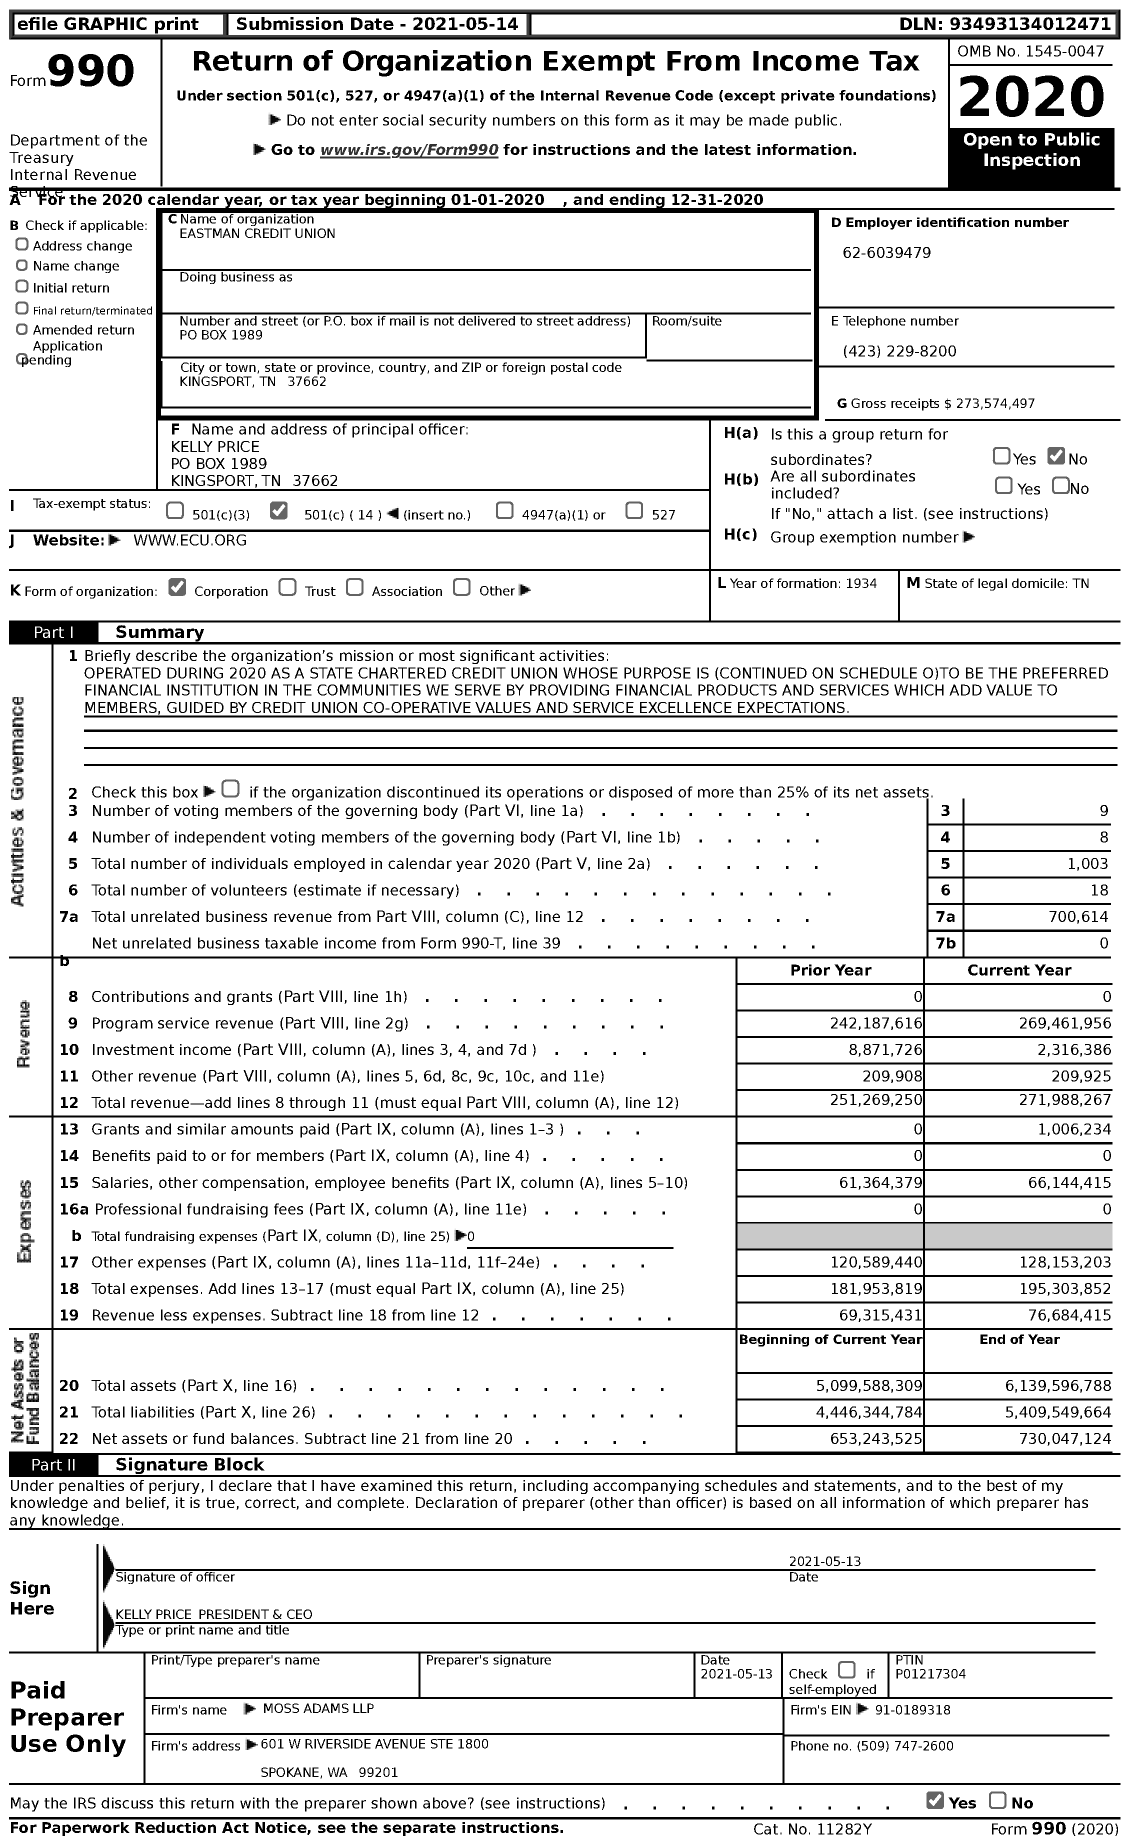 Image of first page of 2020 Form 990 for Eastman Credit Union (ECU)